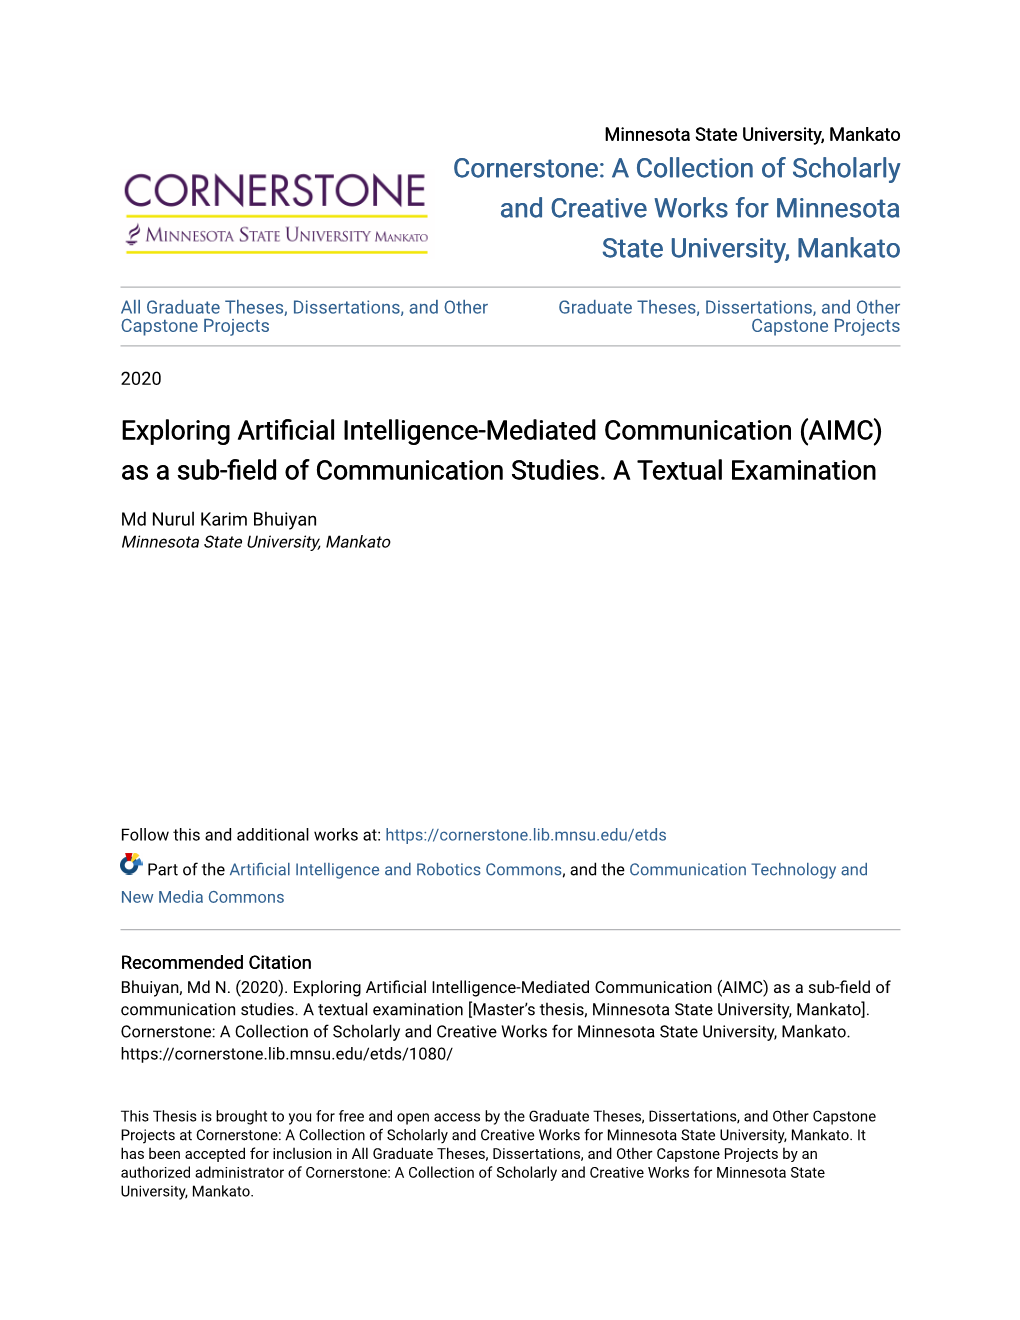 Exploring Artificial Intelligence-Mediated Communication (AIMC) As a Sub-Field of Communication Studies